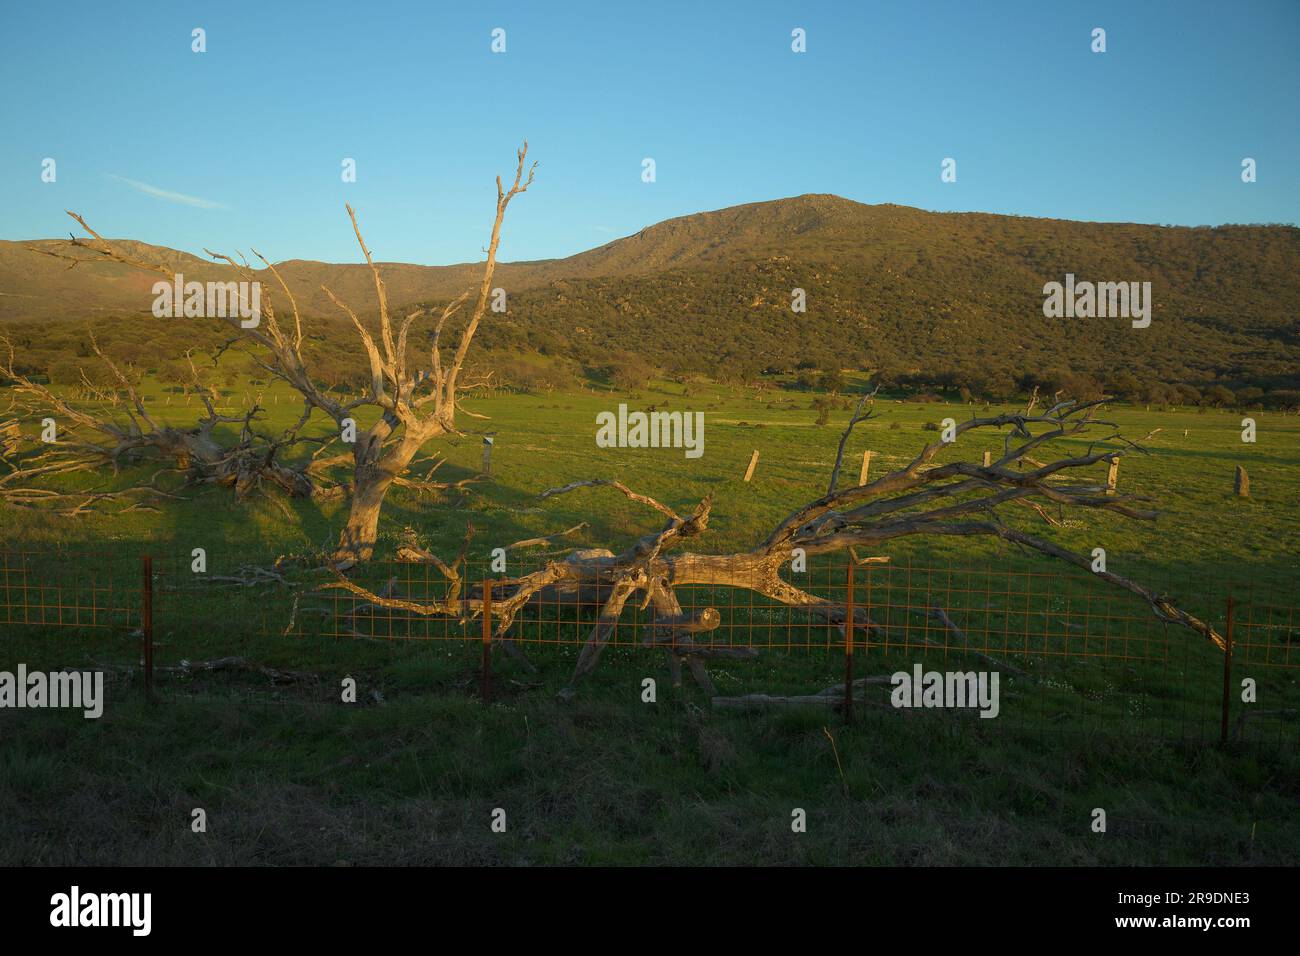 Holm oaks affected by the drought, dry and dead trees in the pasture of Extremadura Stock Photo